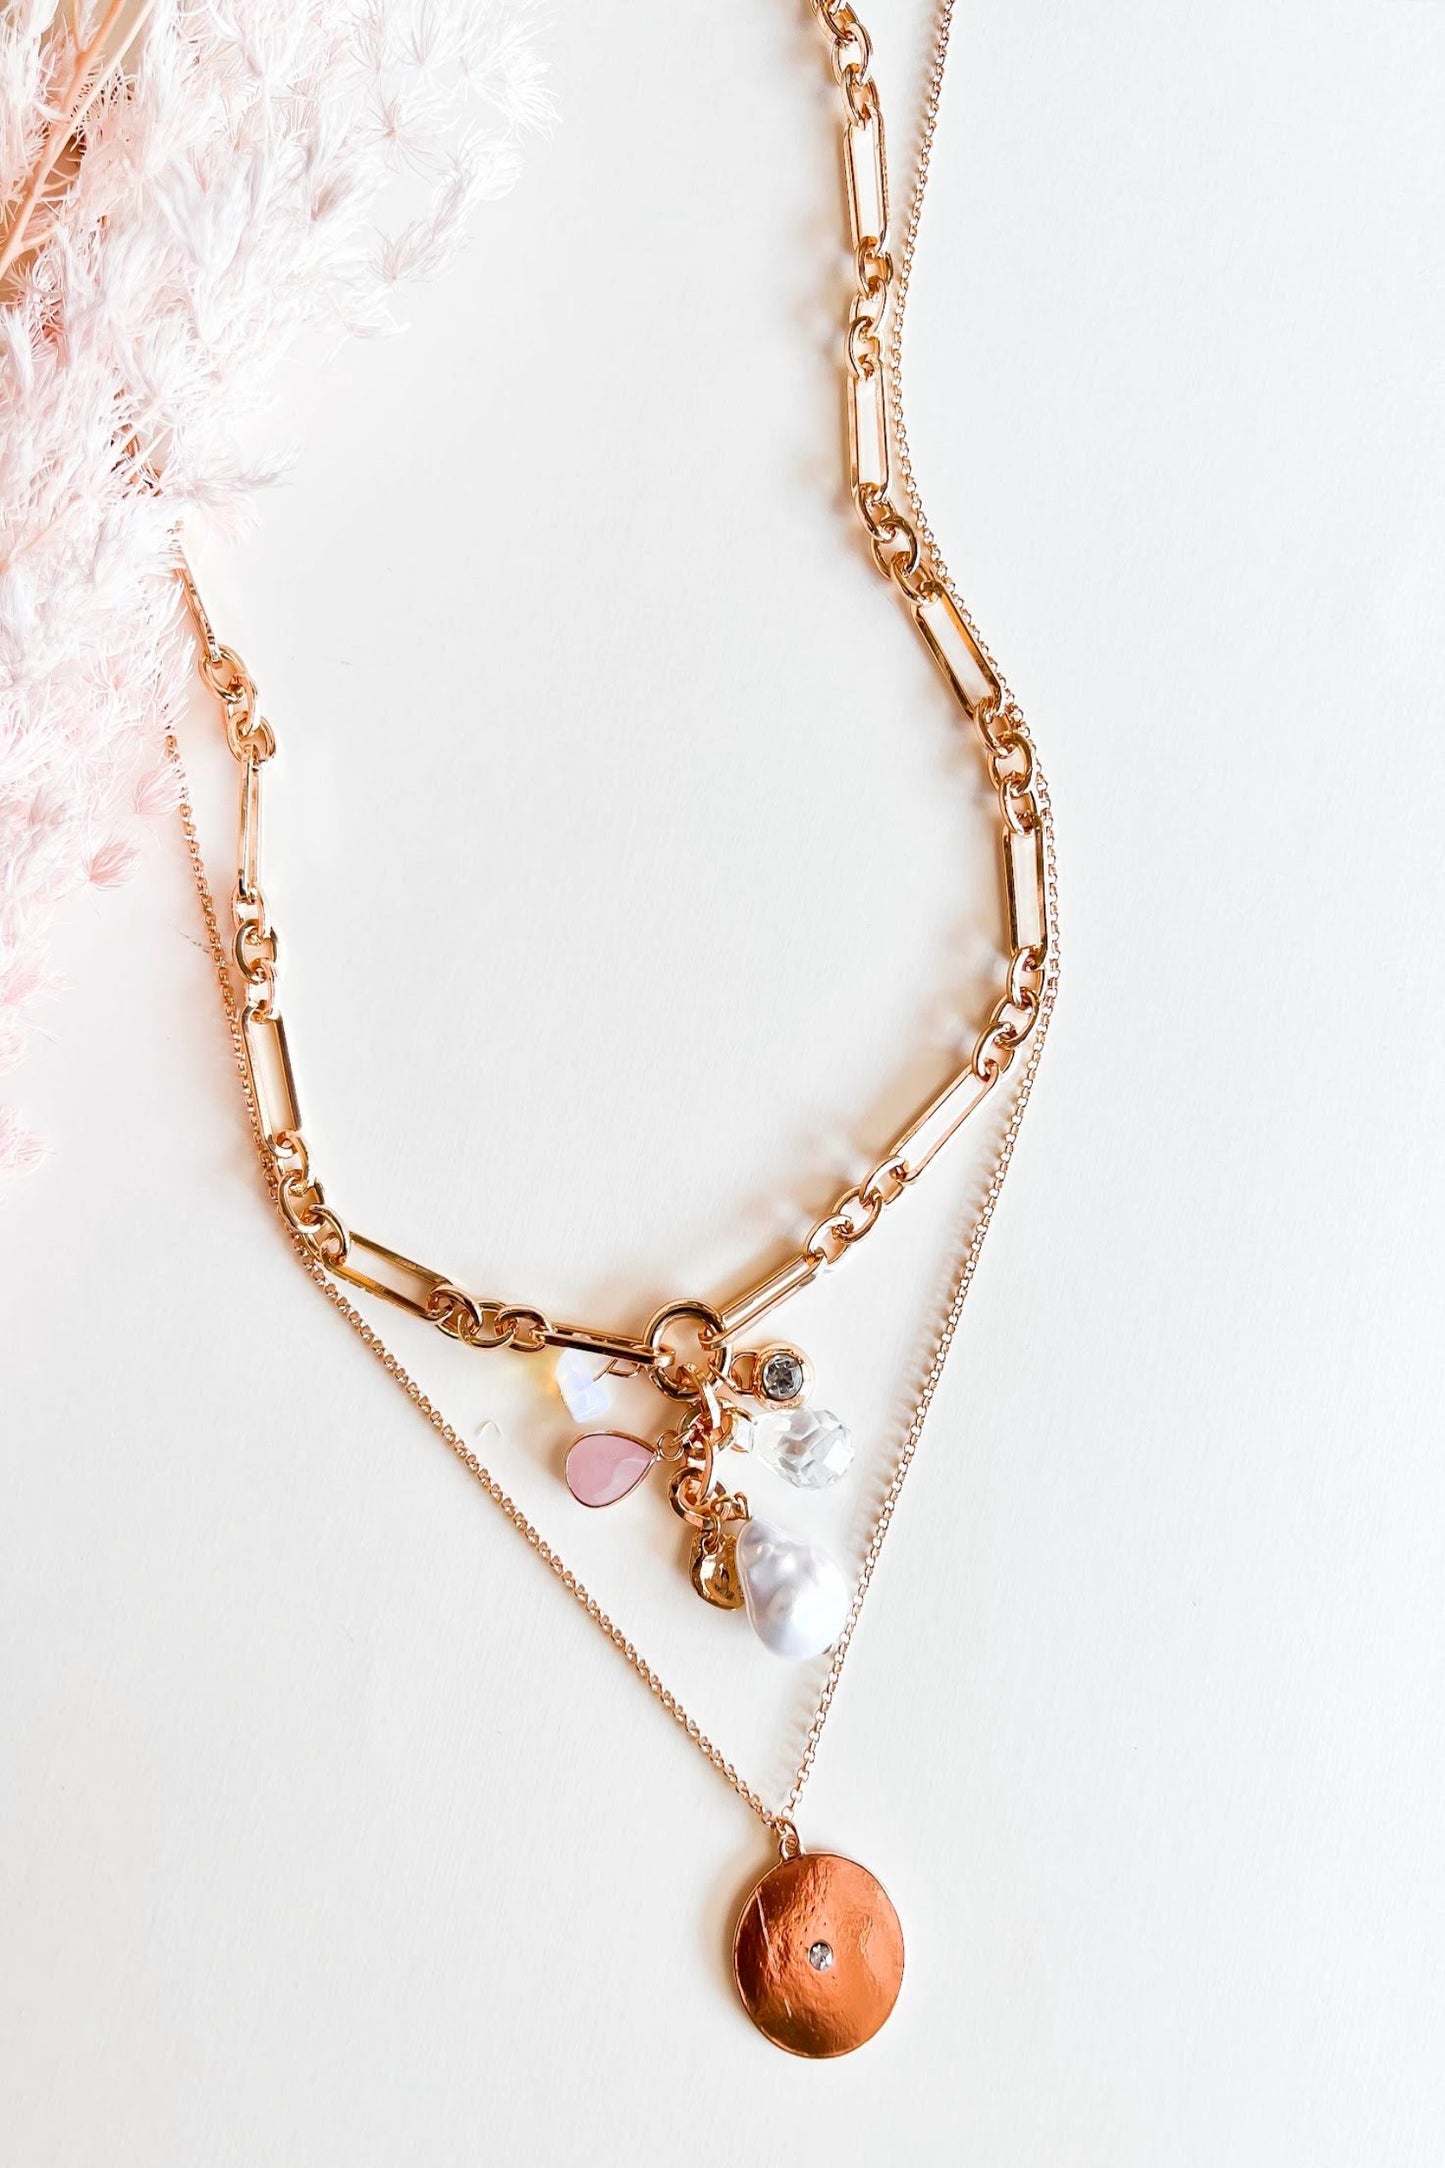 Natalie Layered Charm Necklace | Gold Chains with Pearl Pink and Gold Charms | Two Tiered Long Layering Chain Necklace